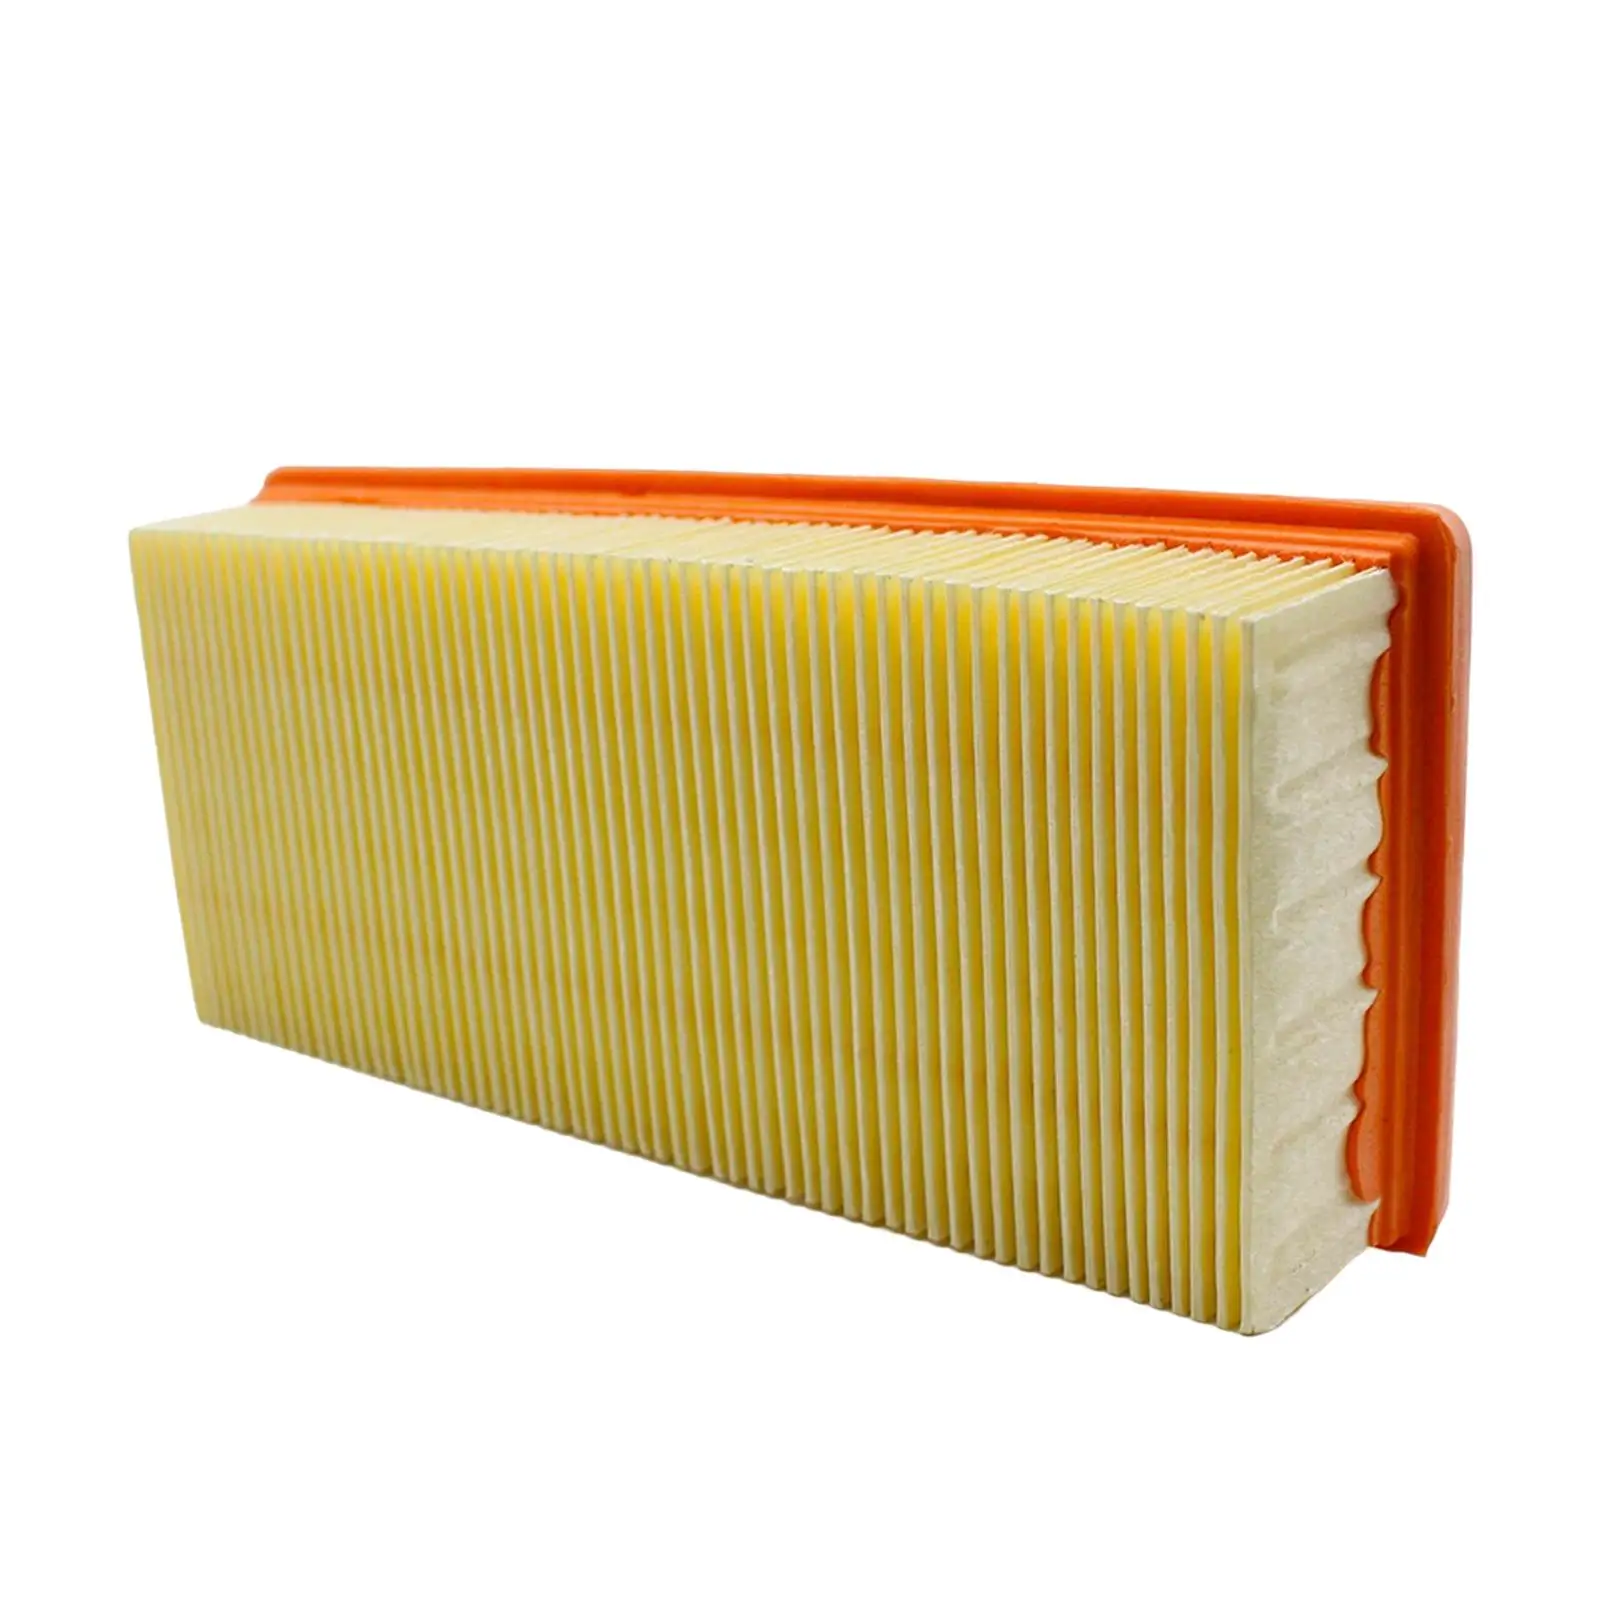 air Filter Premium Portable, Effective Easy to Install High Performance Convenient Air Filter for BMW 0GT 0Gtl